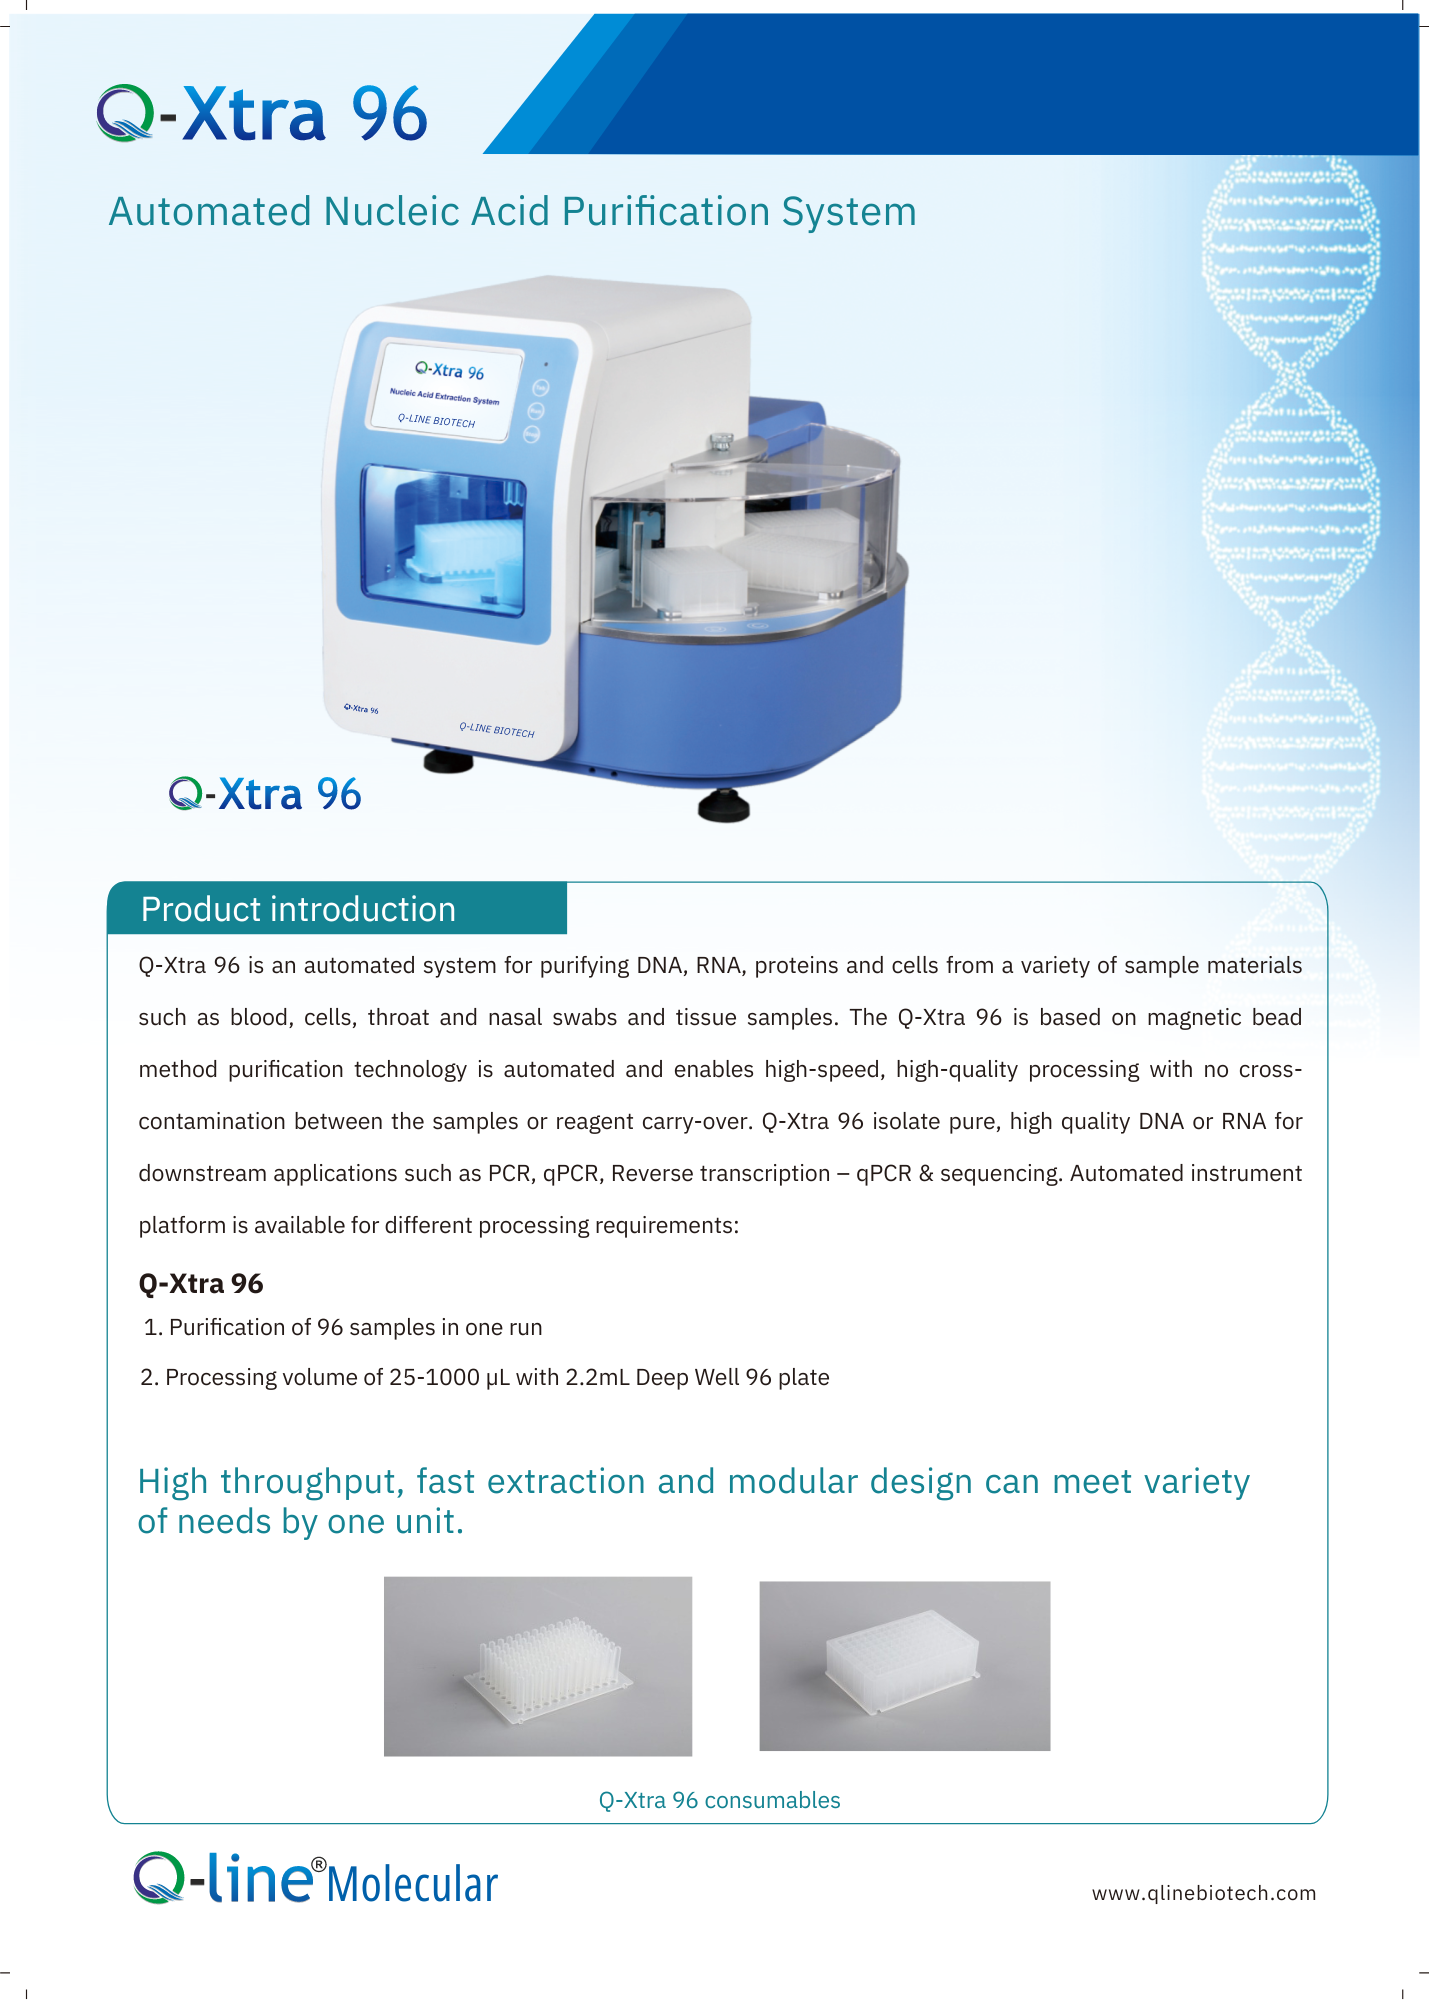 Q-Xtra 96 automated system Extraction system